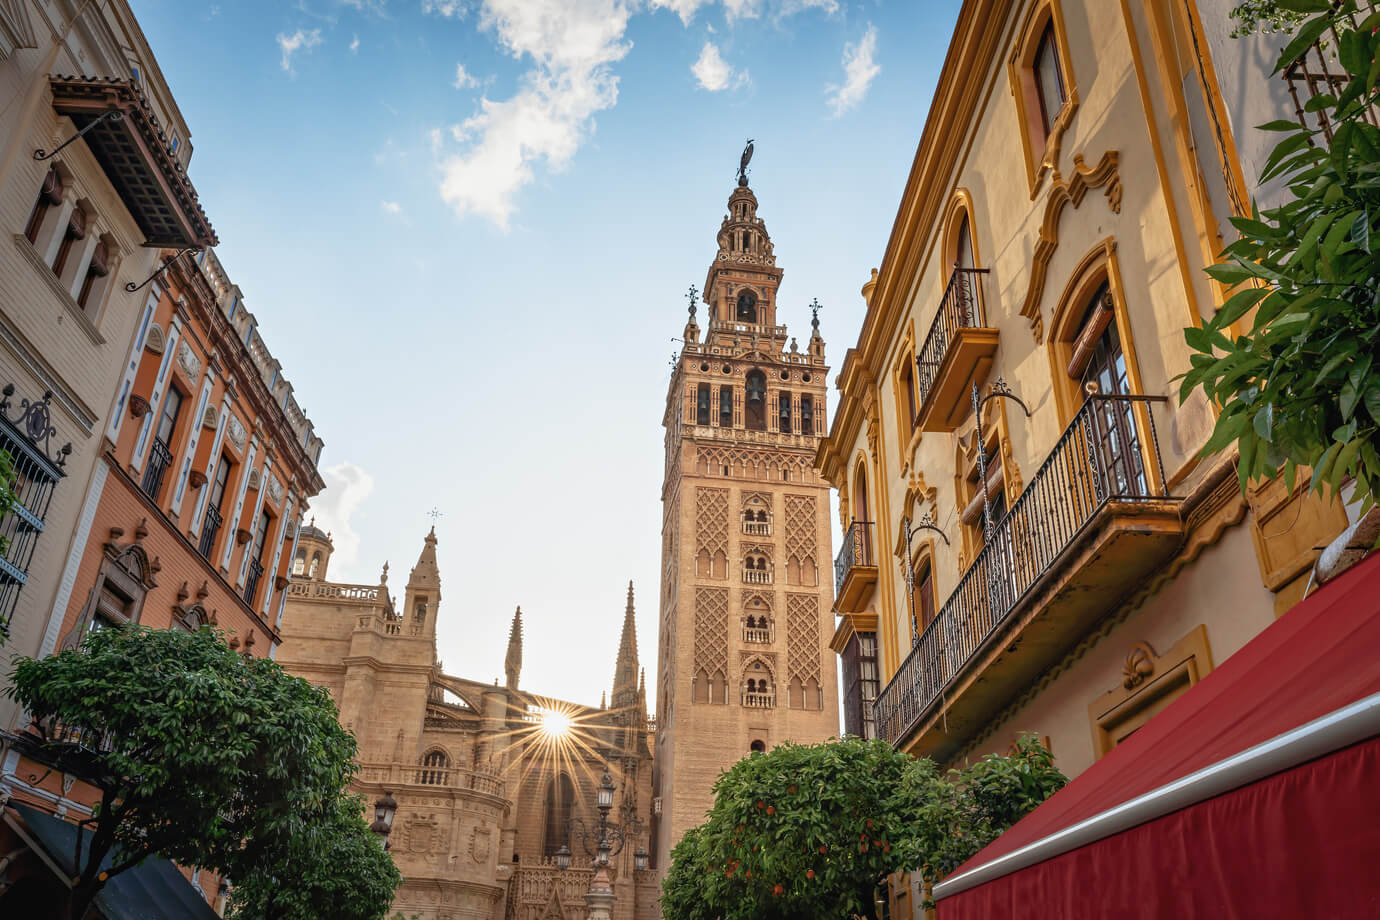 Seville Cathedral and Giralda Tower - Seville, Andalusia, Spain